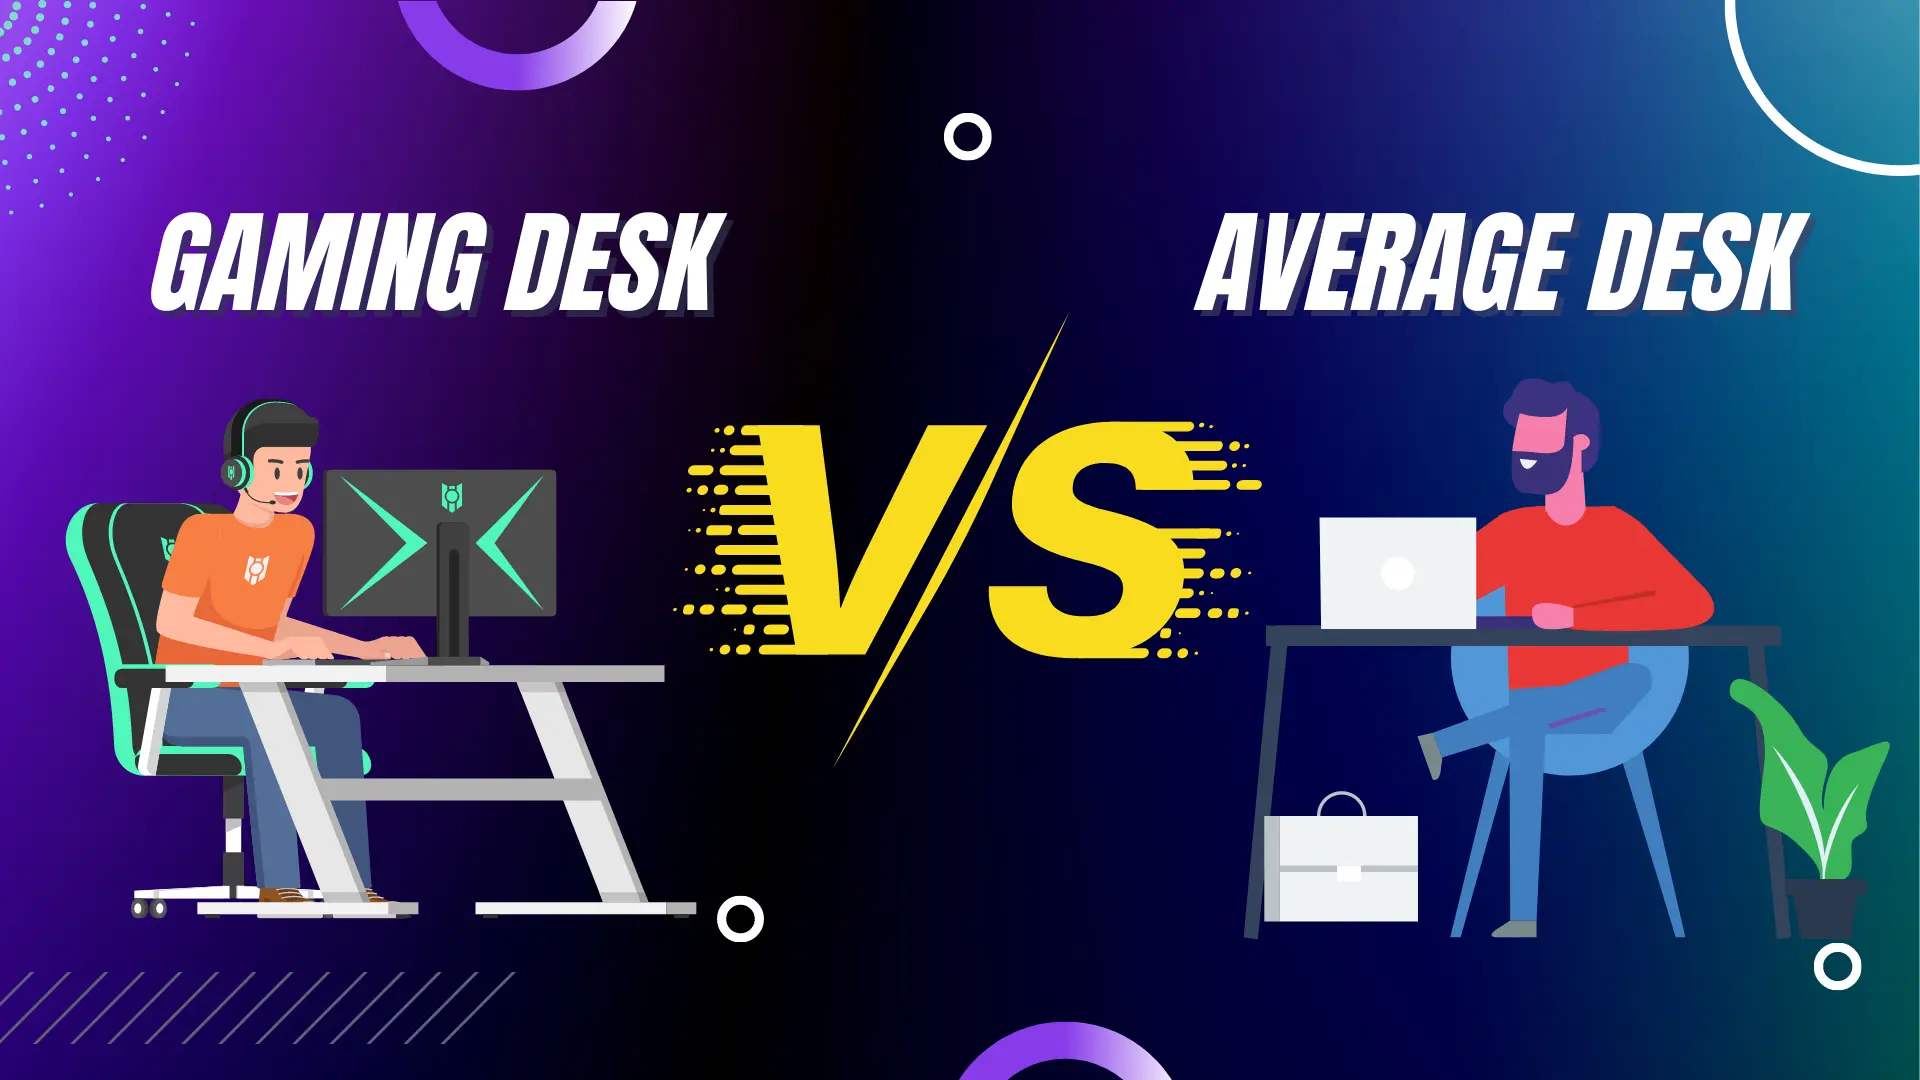 Gaming Desk vs Average Desk: Why Are the Differences?